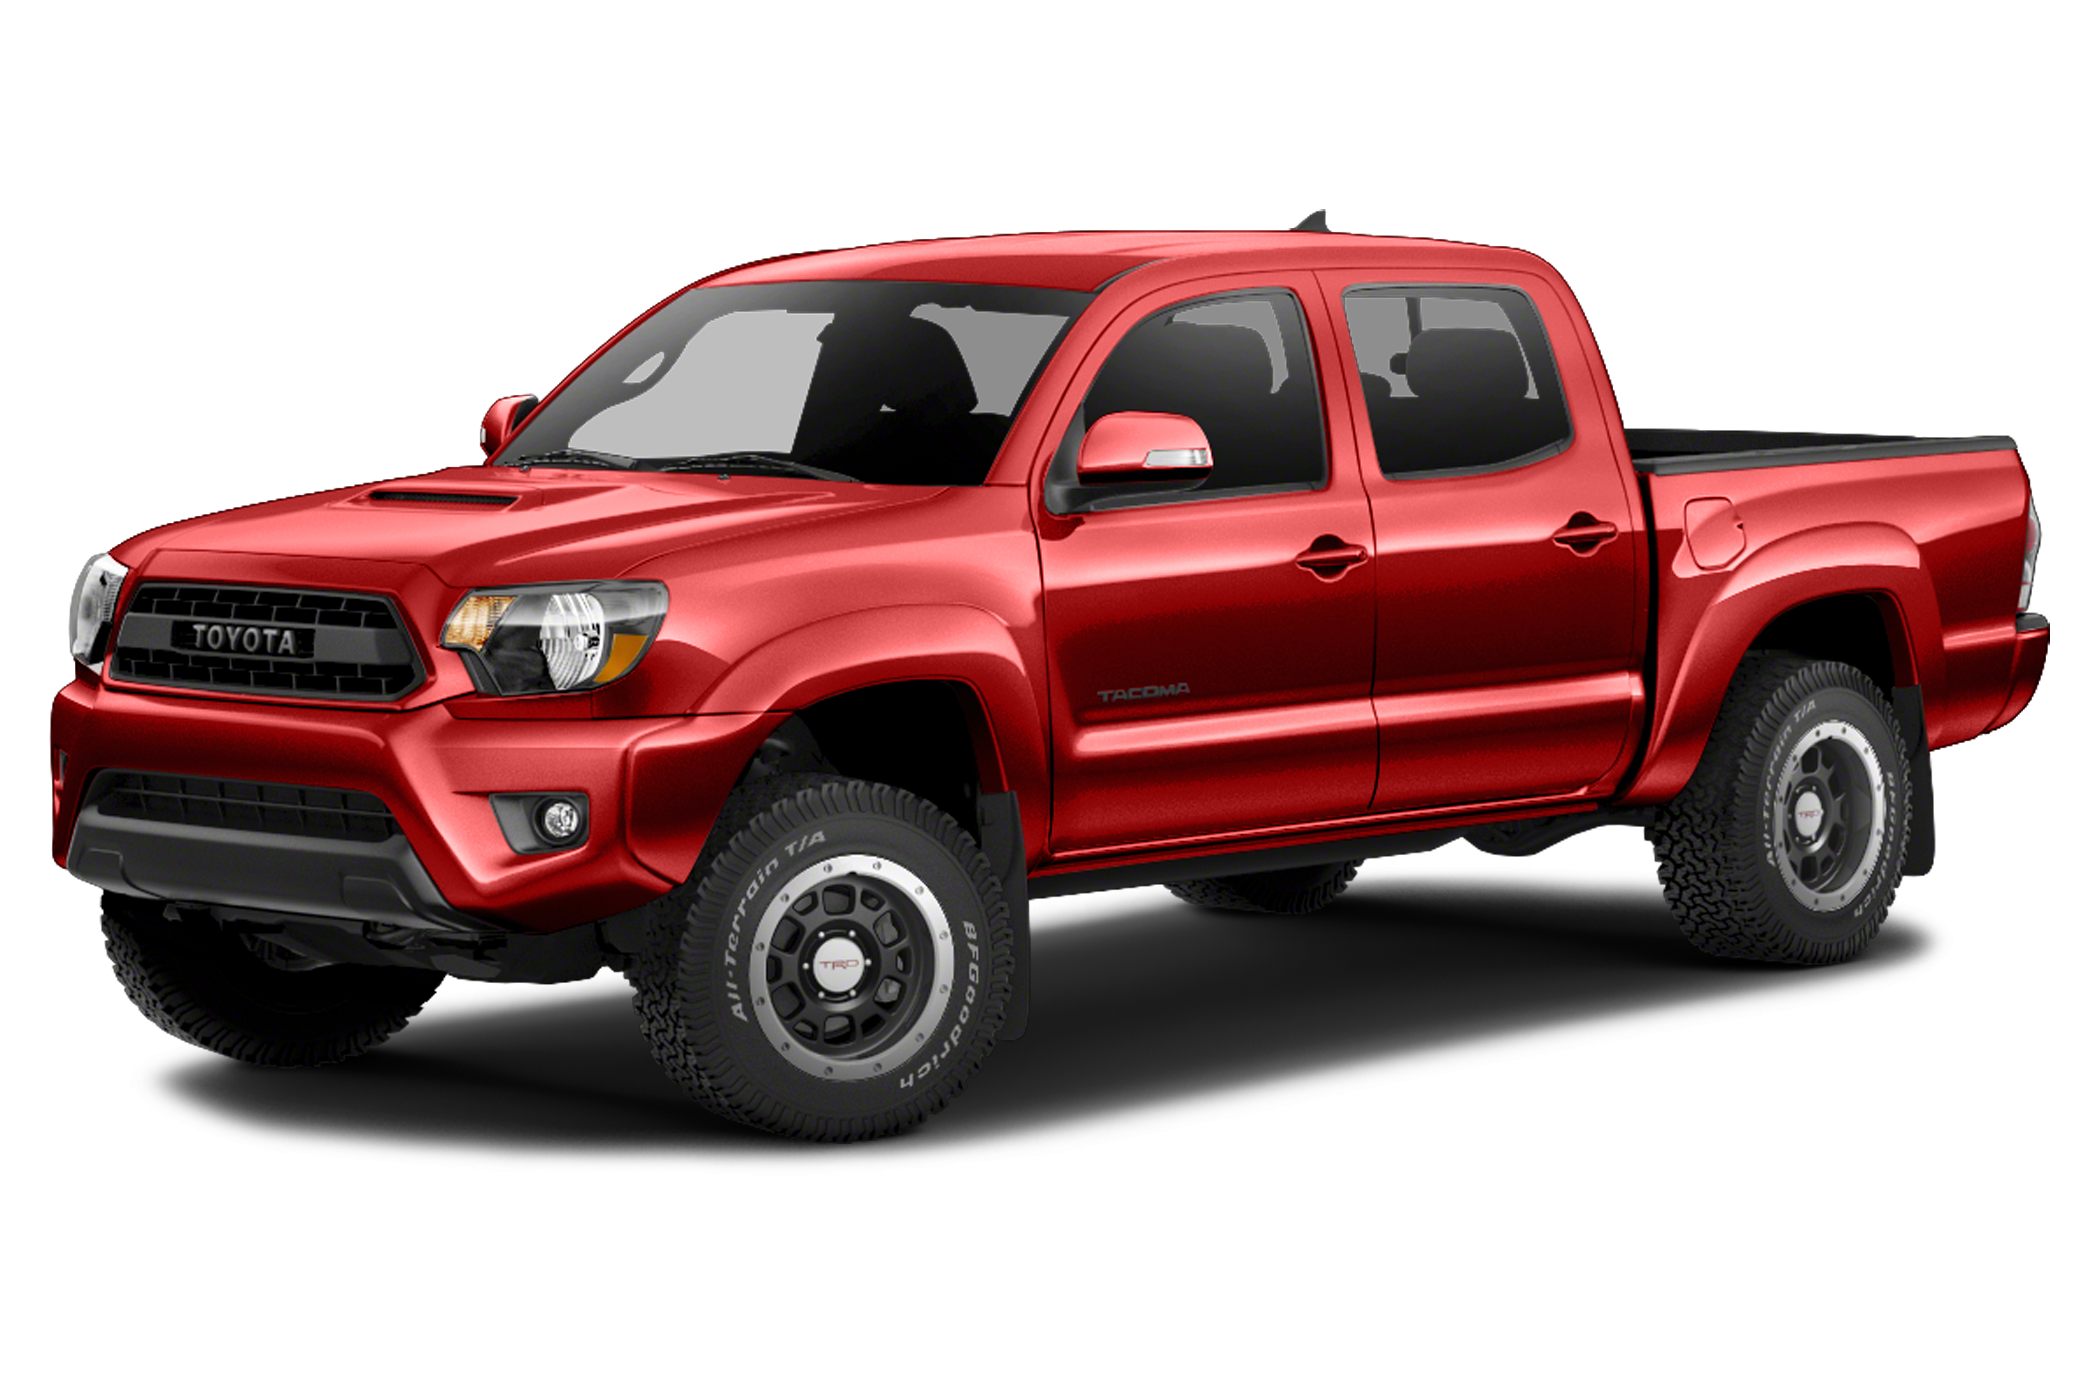 2015 Toyota Tacoma Trd Pro 4x4 Double Cab 127 4 In Wb Specs And Prices